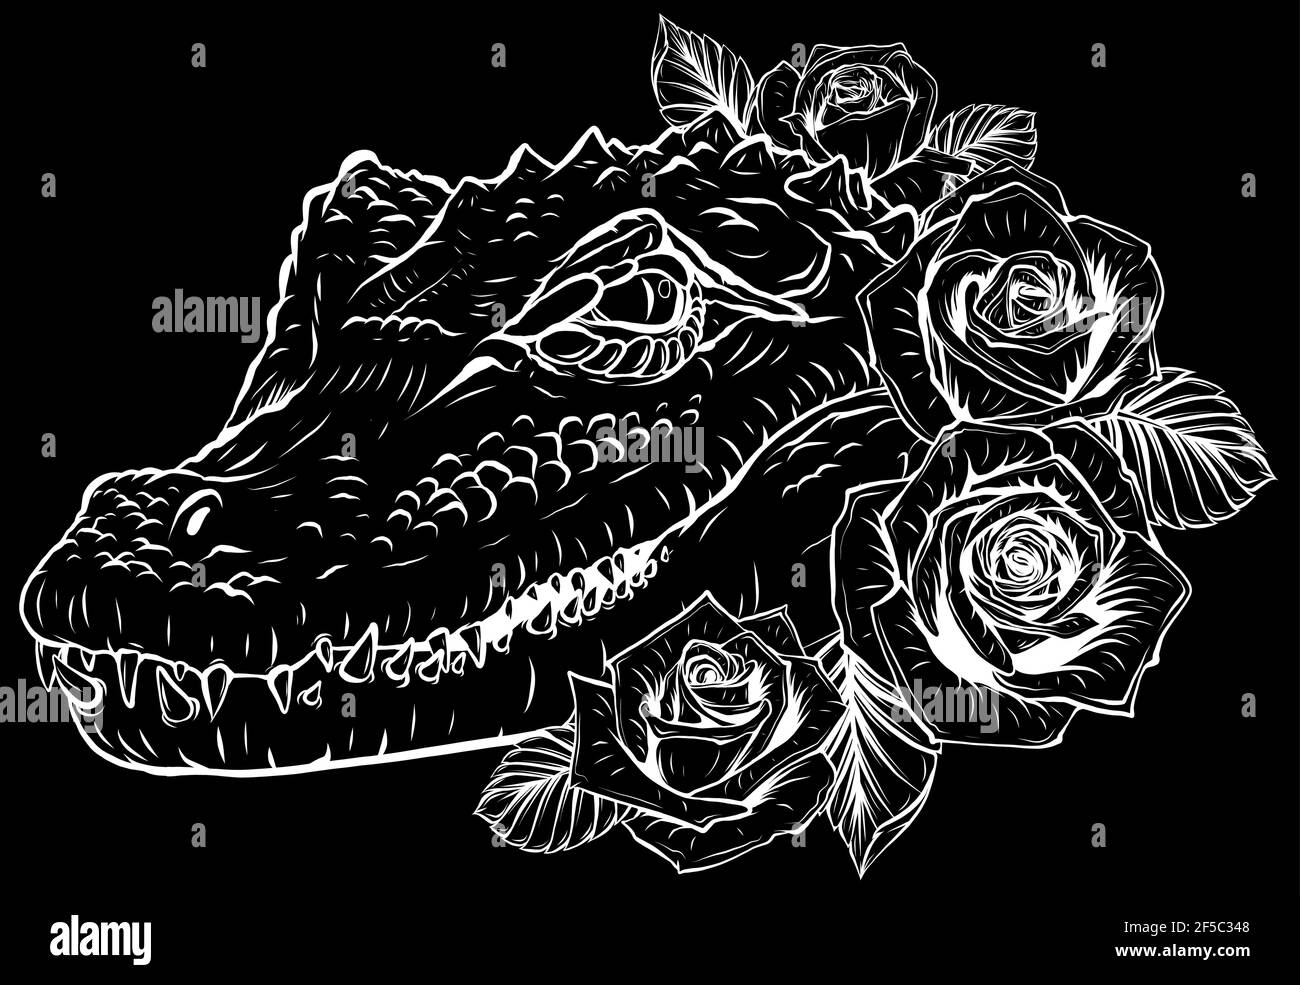 Vector illustration of crocodile head with roses Stock Vector